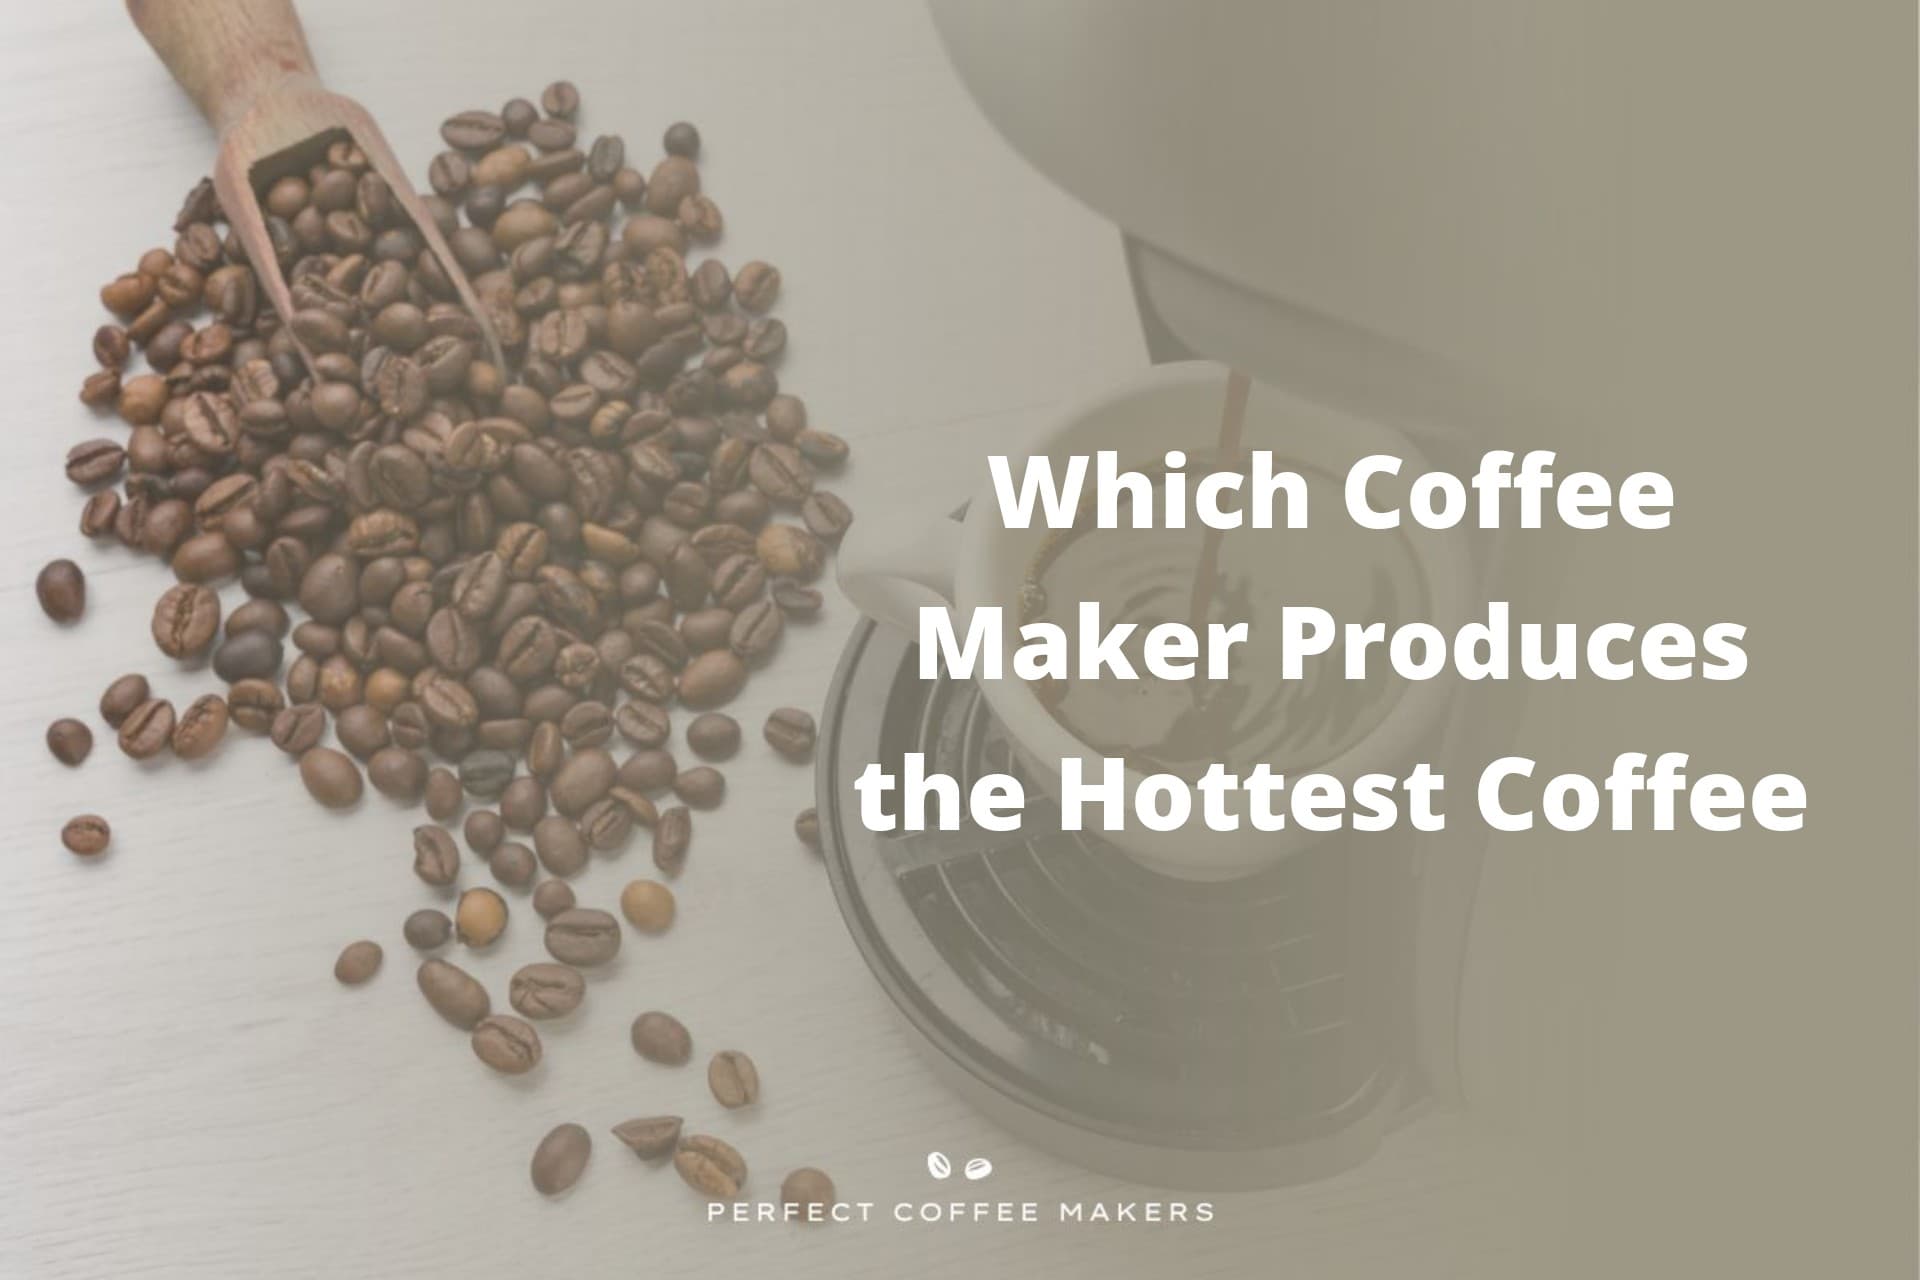 Which Coffee Maker Produces the Hottest Coffee